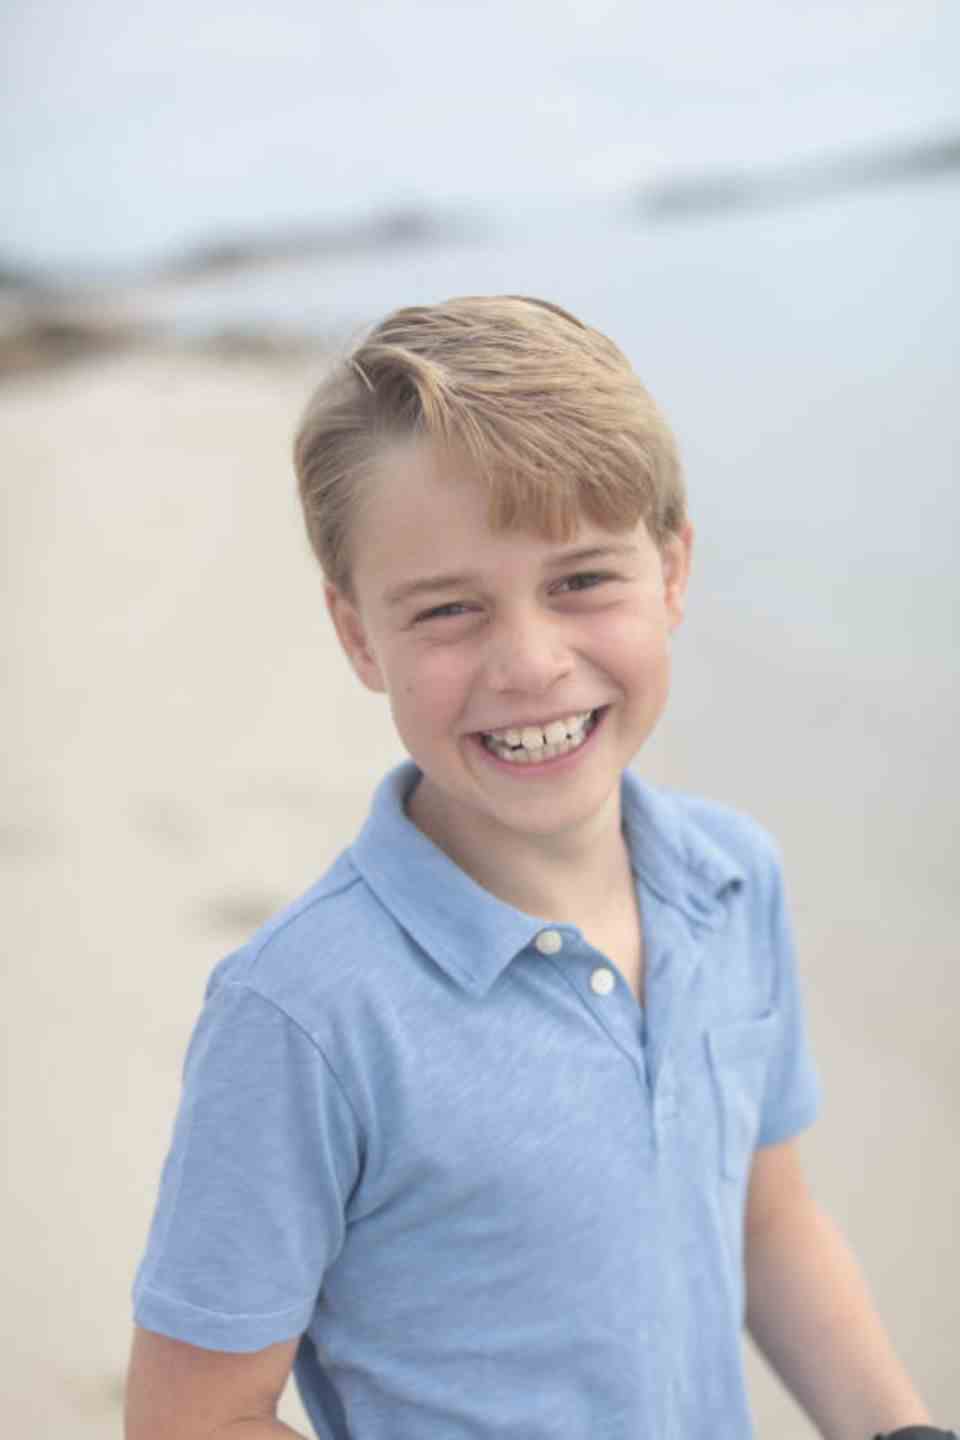 Prince George smiles at the camera on the beach